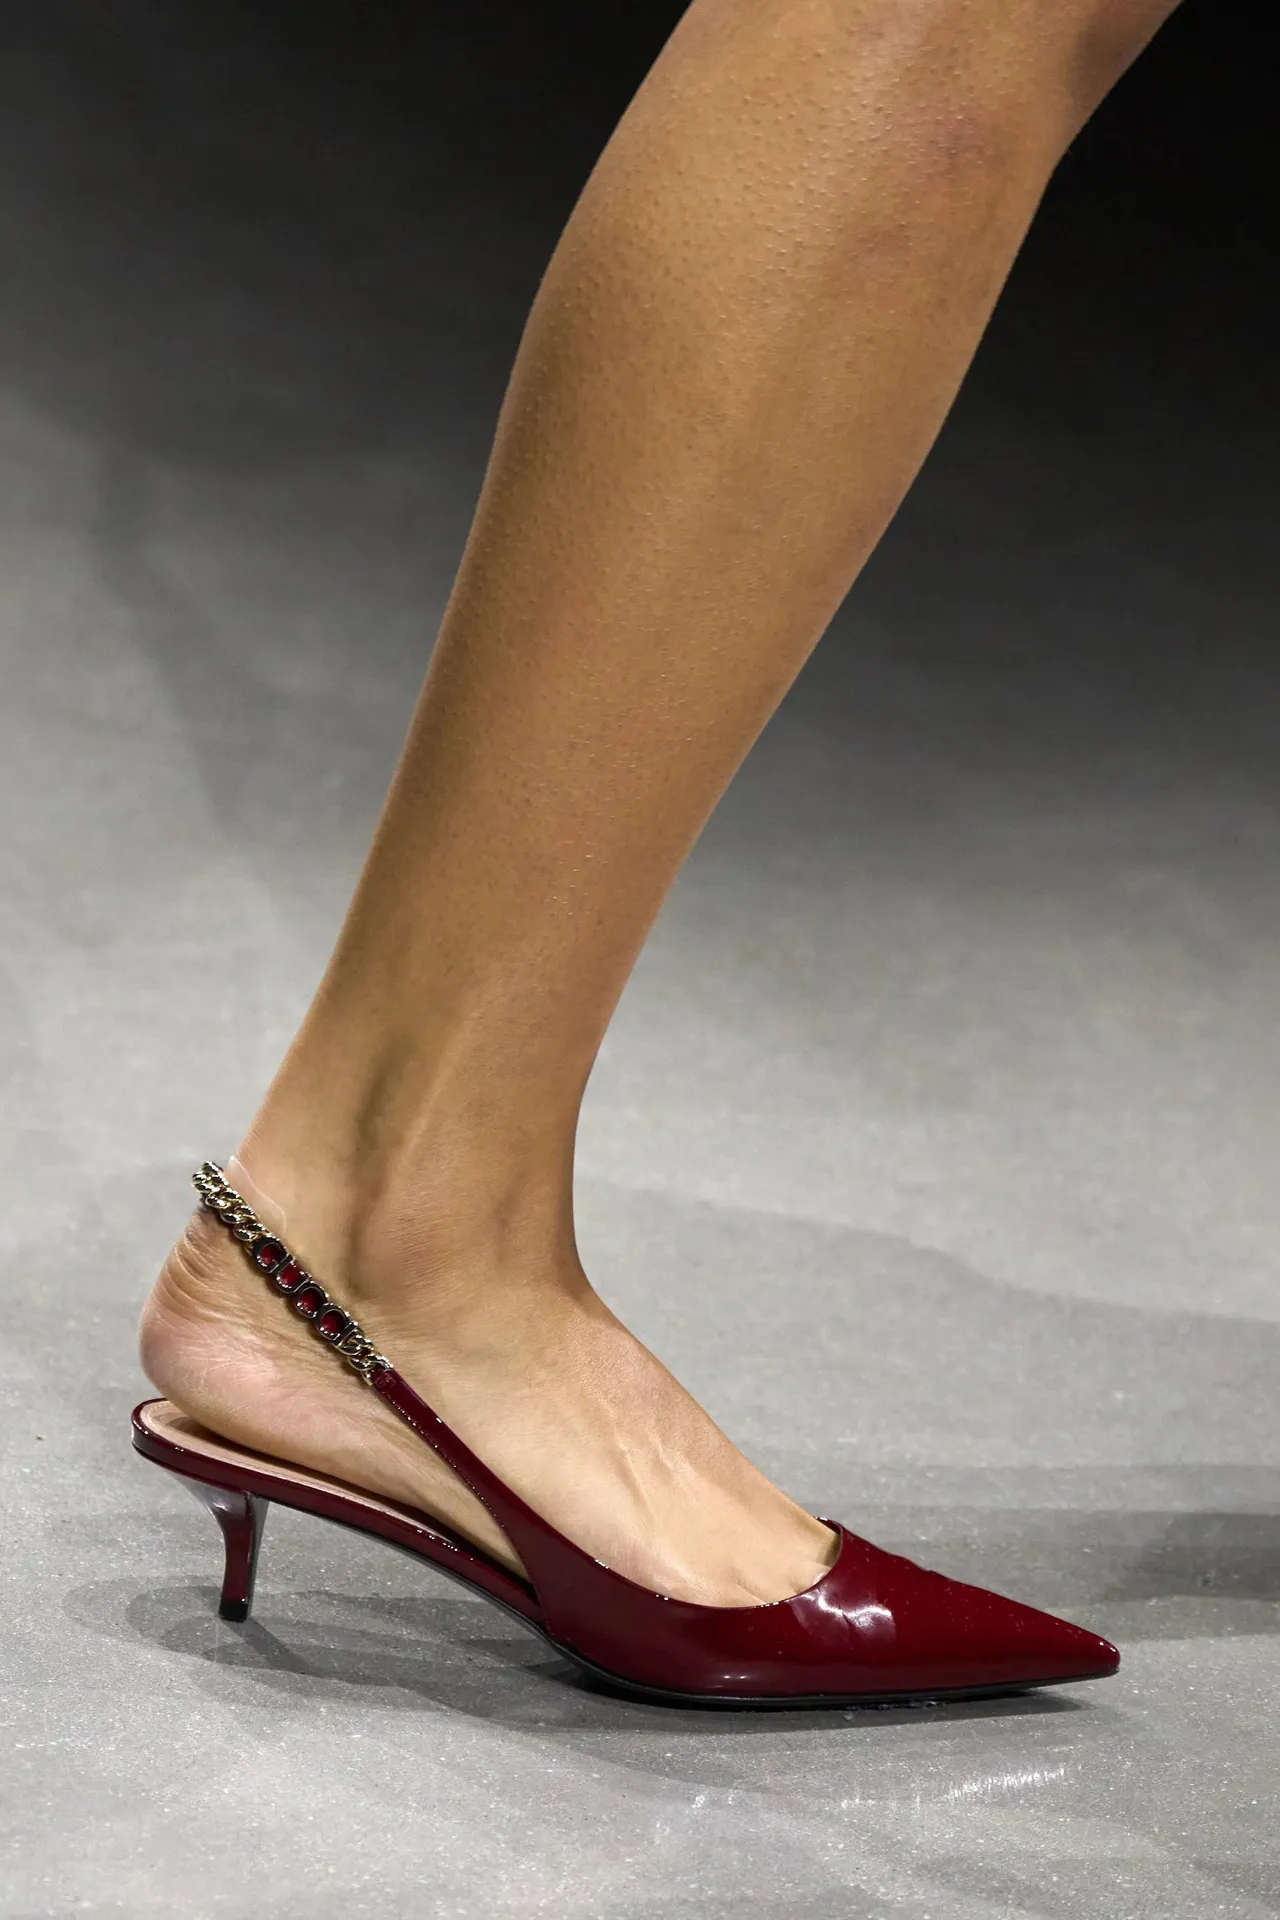 An image capturing the elegance of a slender leg adorned with a glossy, oxblood-colored kitten heel. The shoe, with a pointed toe and delicate heel, features a charming embellishment - a sparkling anklet with crimson gems cradled in silver settings, adding a touch of glamour to every step. This snapshot is all about the grace of subtle details and the power of a shoe to not just complement an outfit but to define a moment.